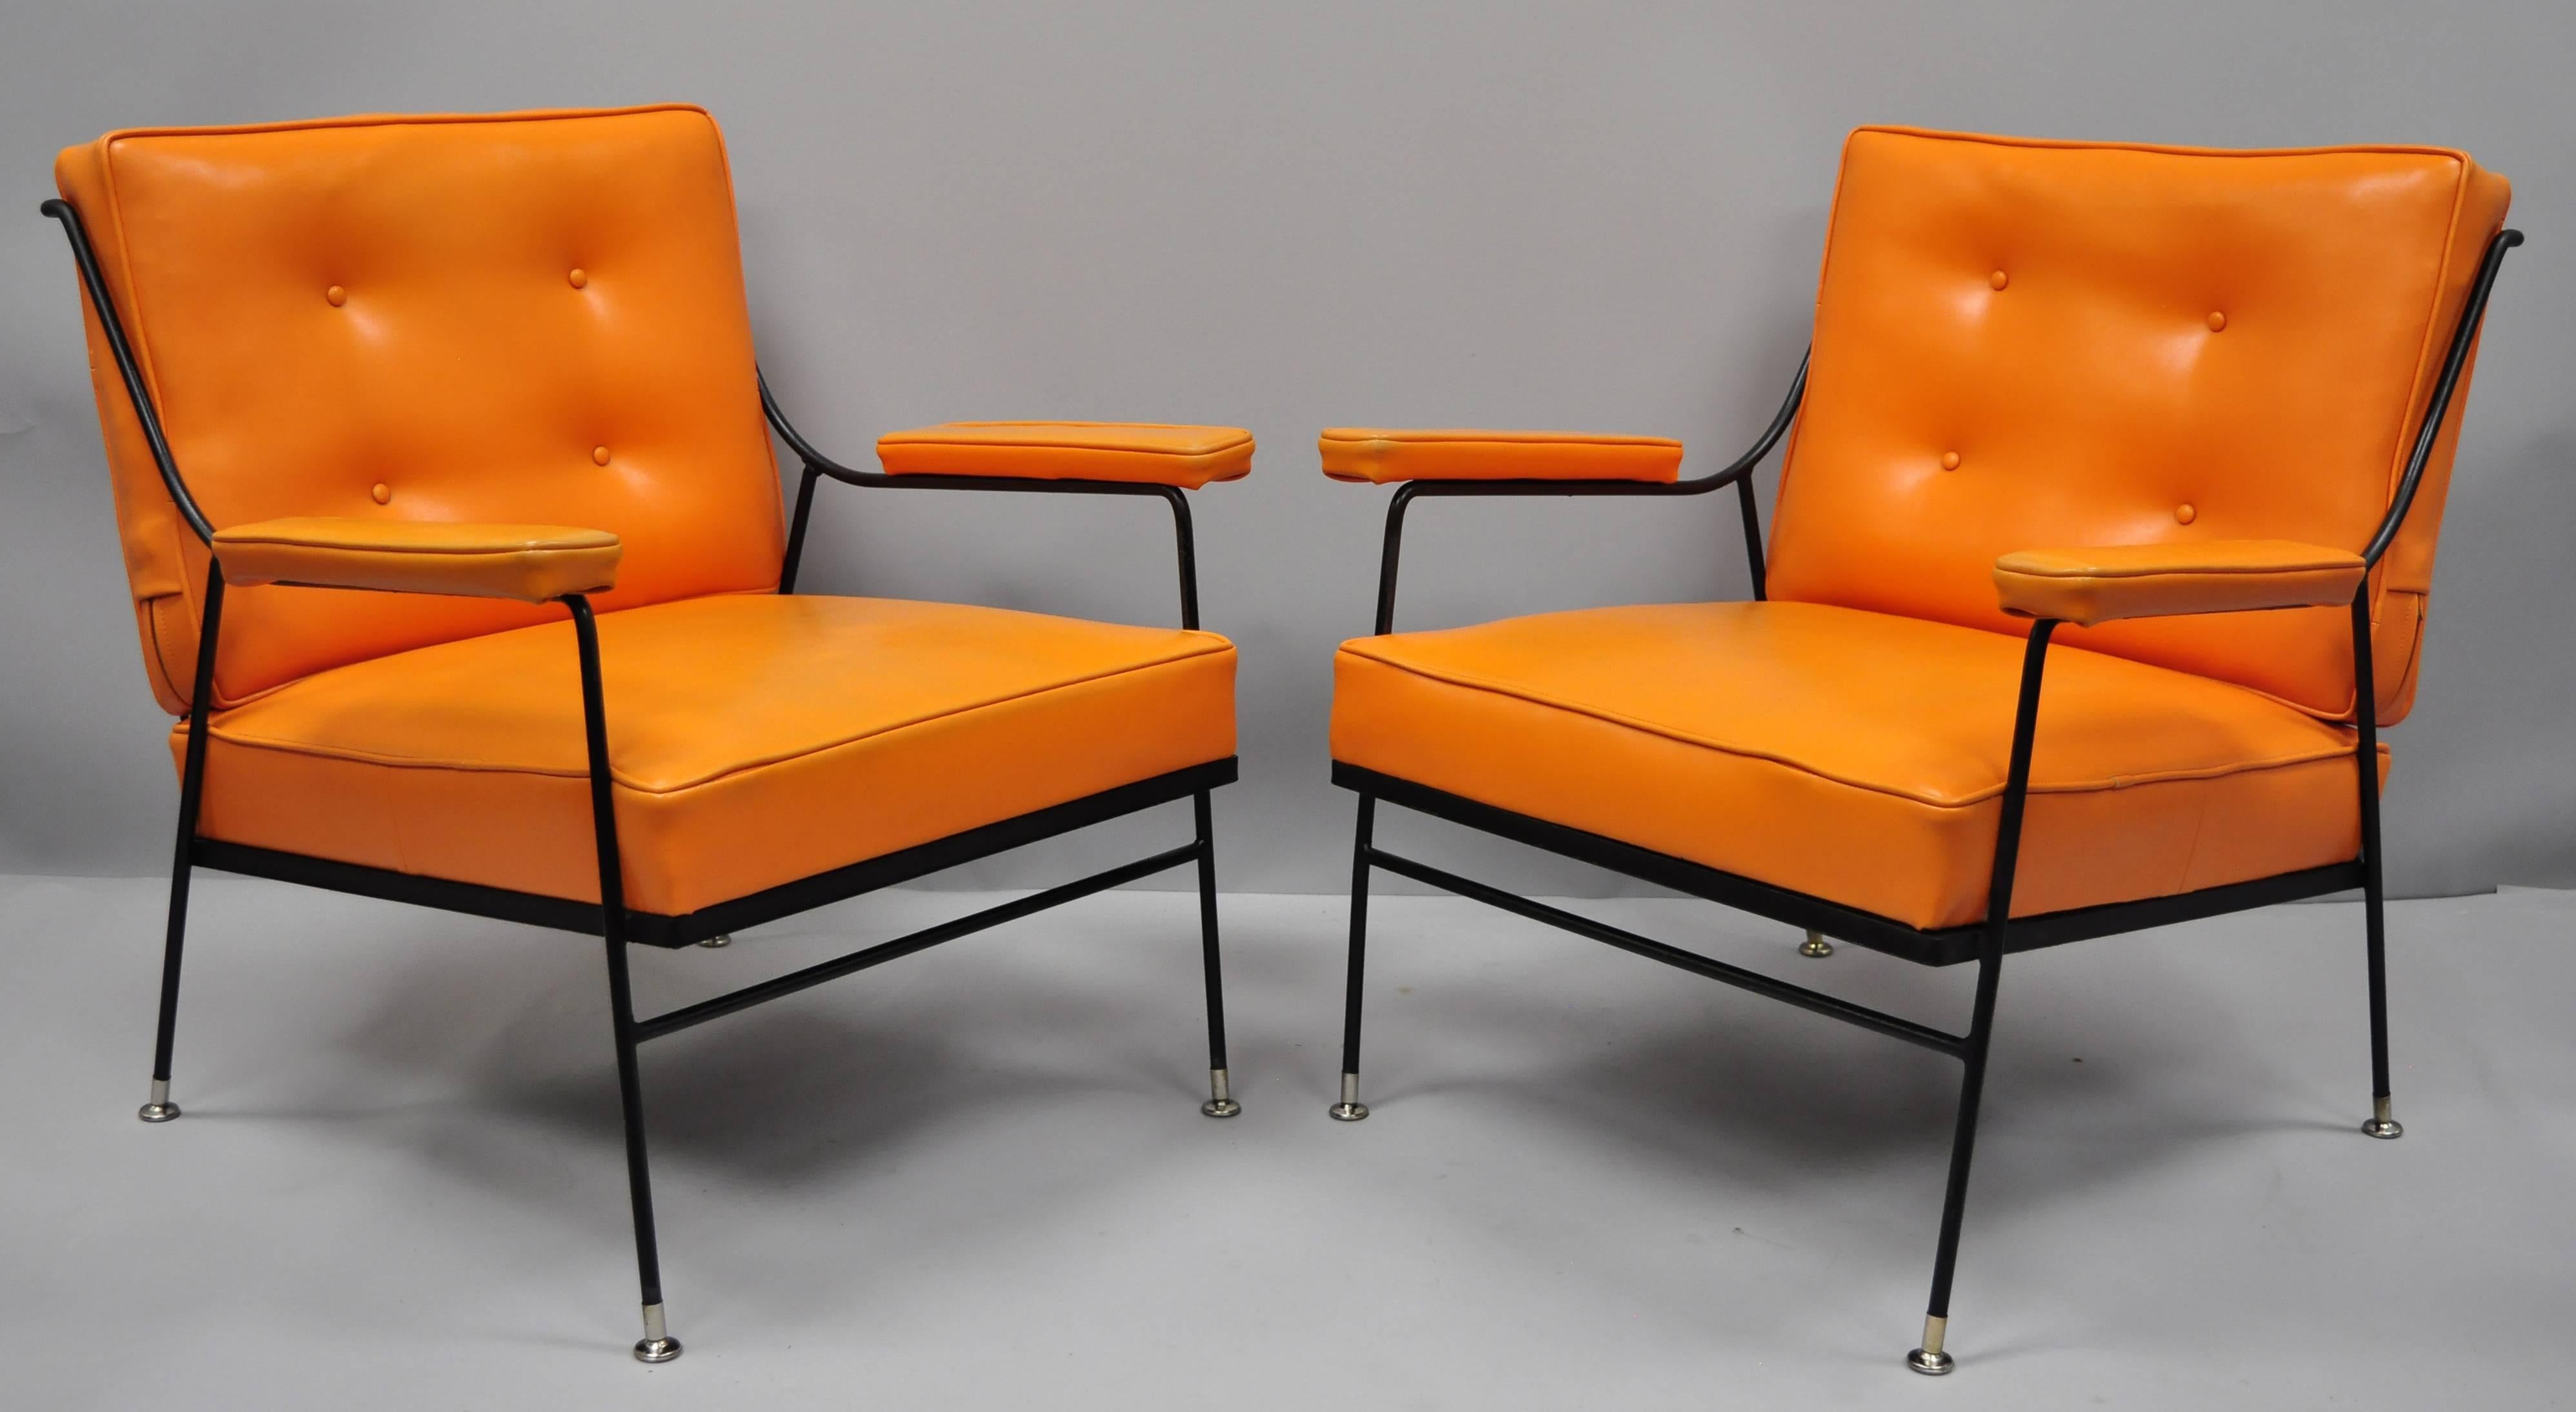 Rare Pair of Mid Century Modern Wrought Iron & Orange Naugahyde Lounge Chairs attributed to Milo Baughman for Pacific Iron Products. Item features button tufted orange vinyl cushions, loose back cushion, wrought iron construction, upholstered